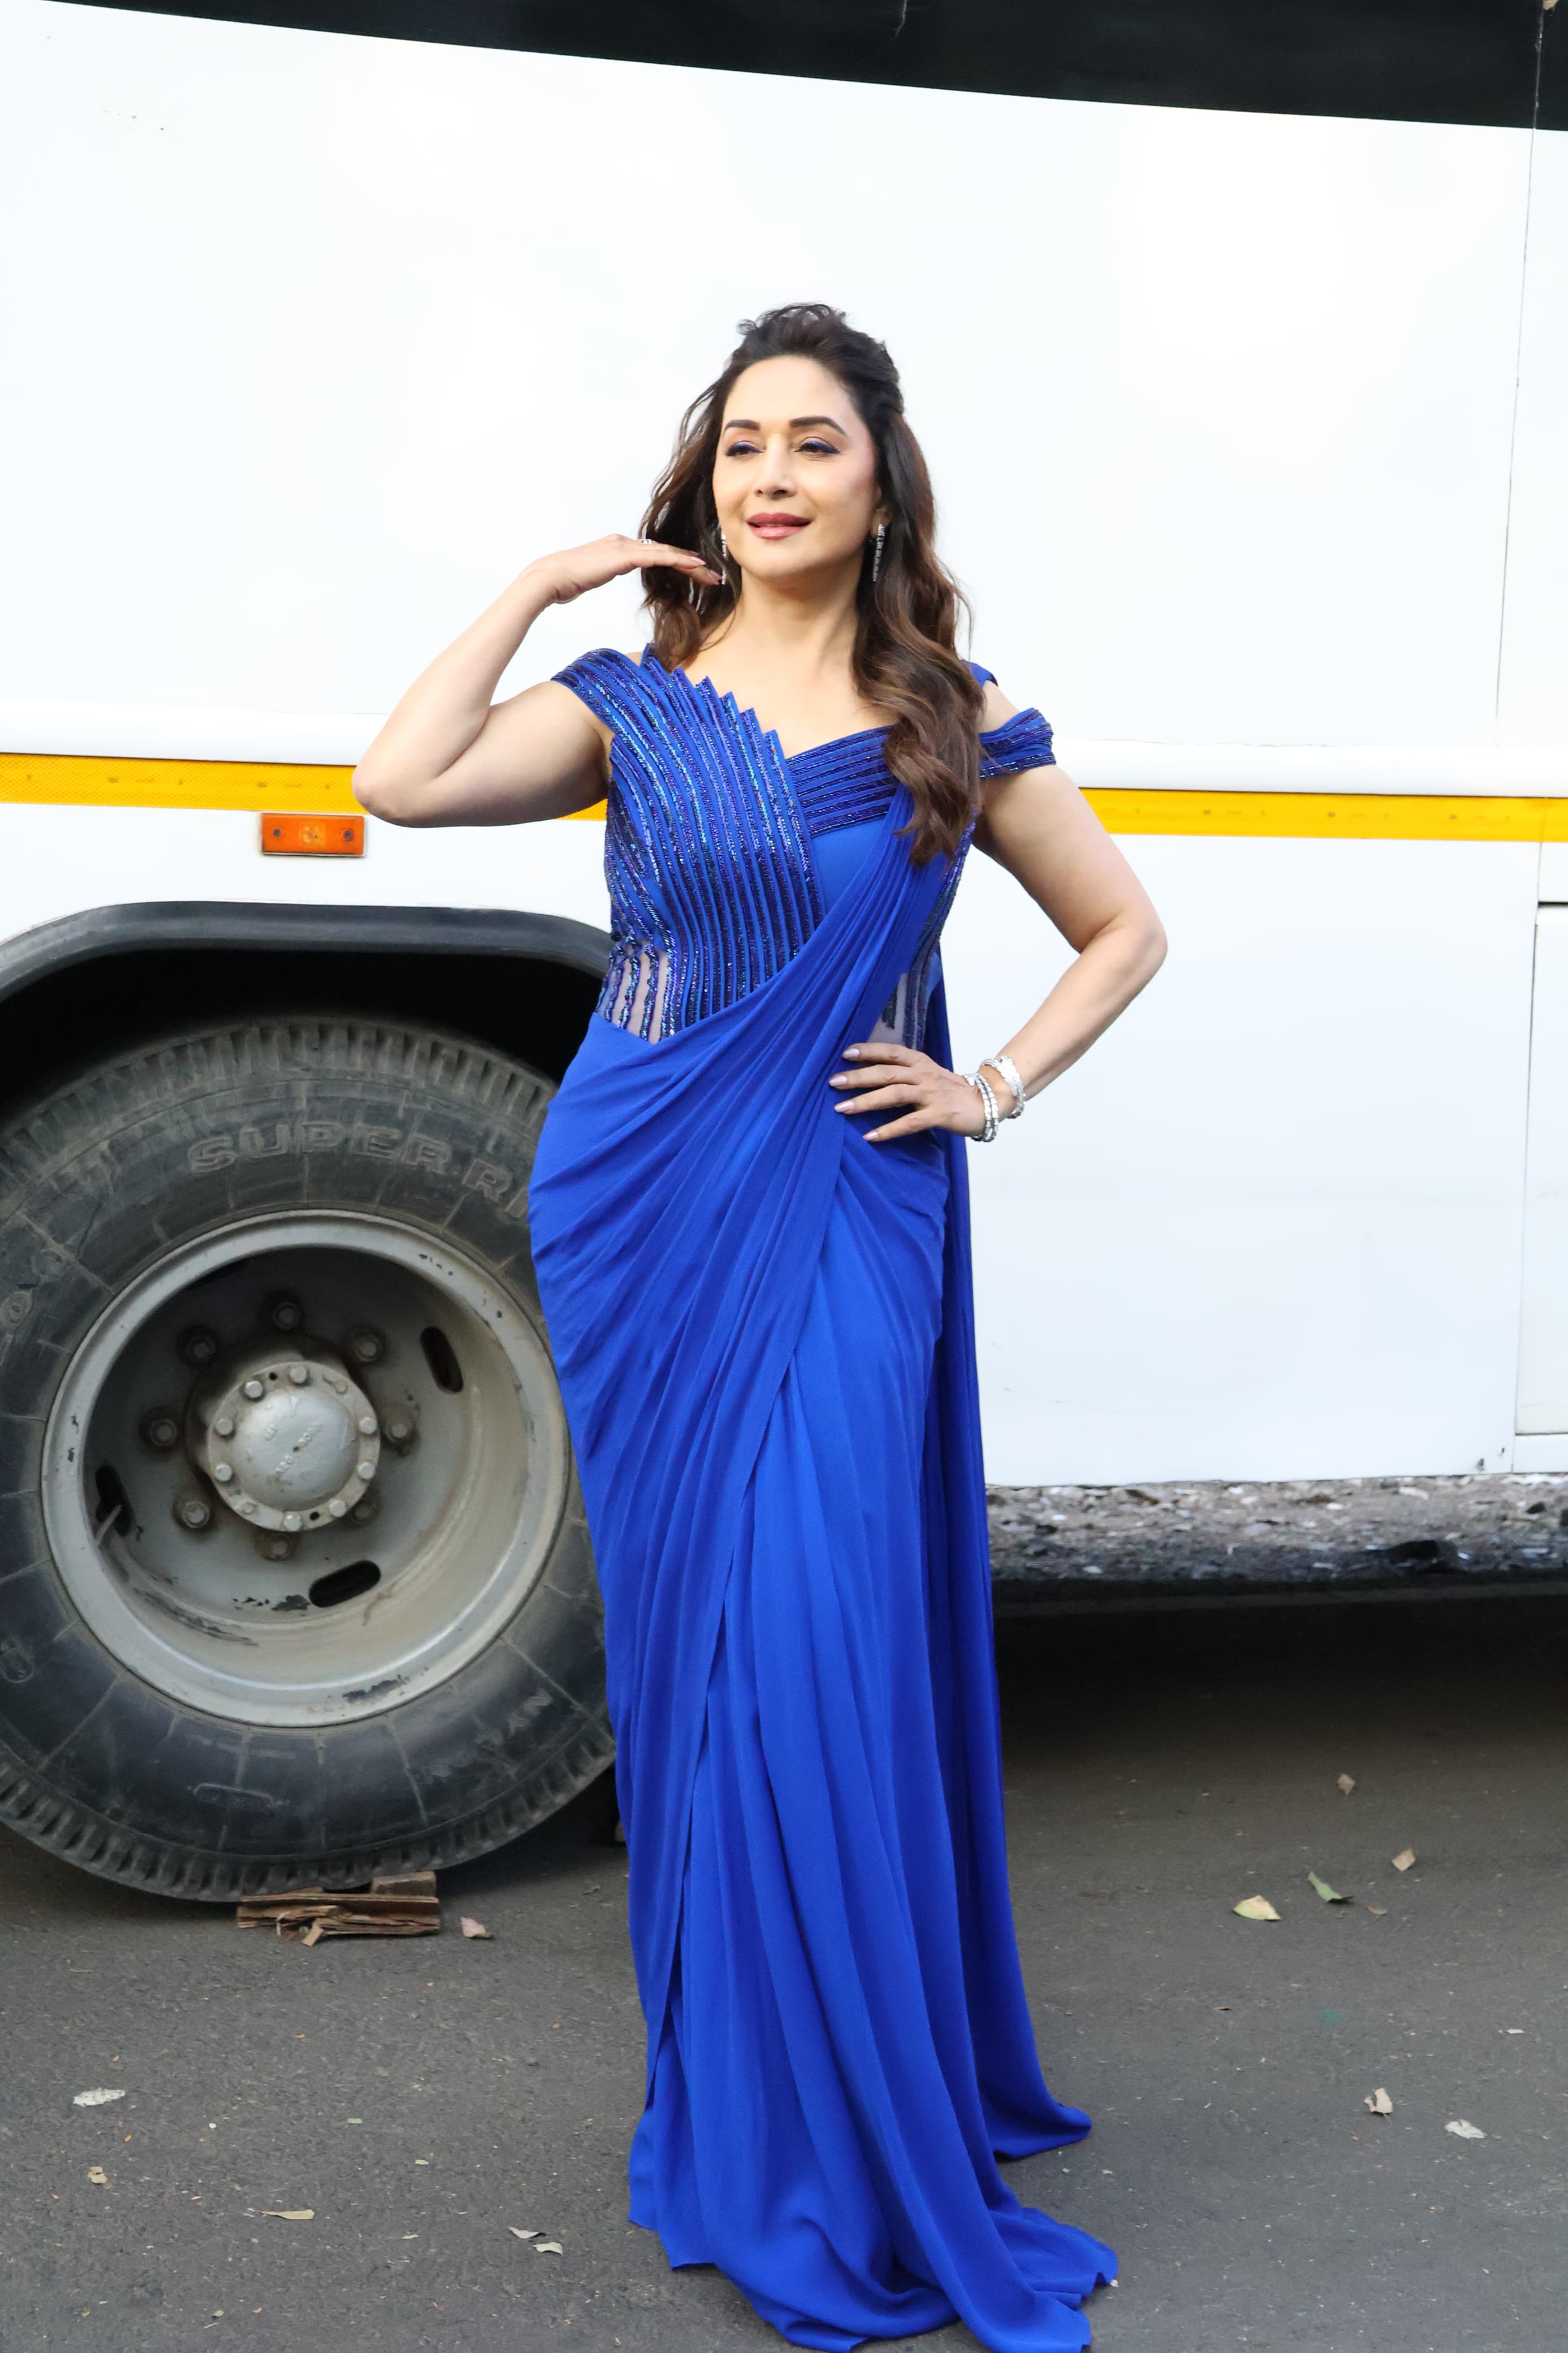 Madhuri Dixit looked gorgeous in a stunning blue saree as she was clicked in the city